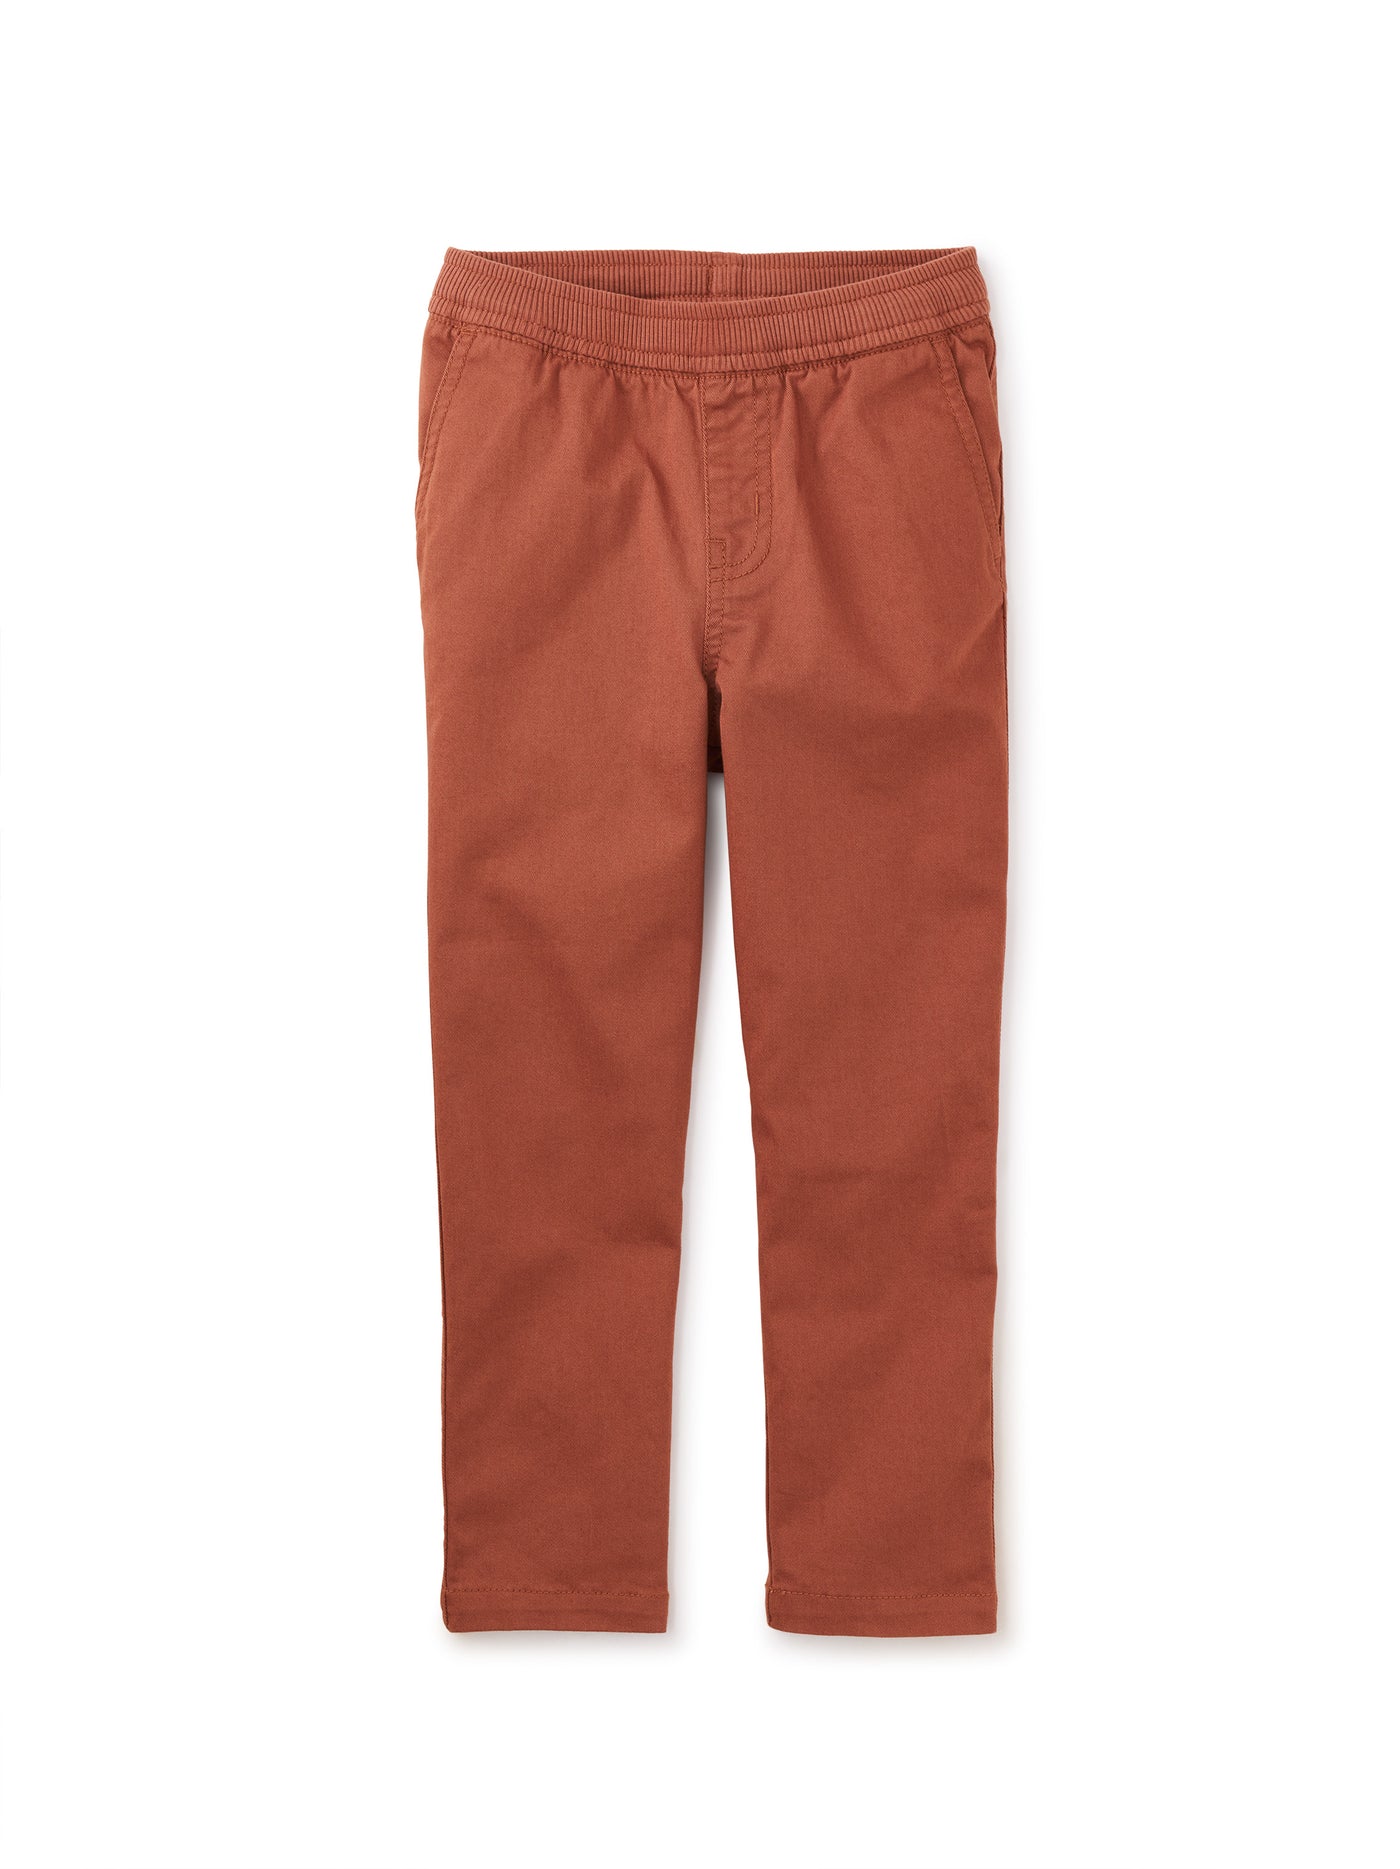 Tea Collection Timeless Stretch Twill Pants